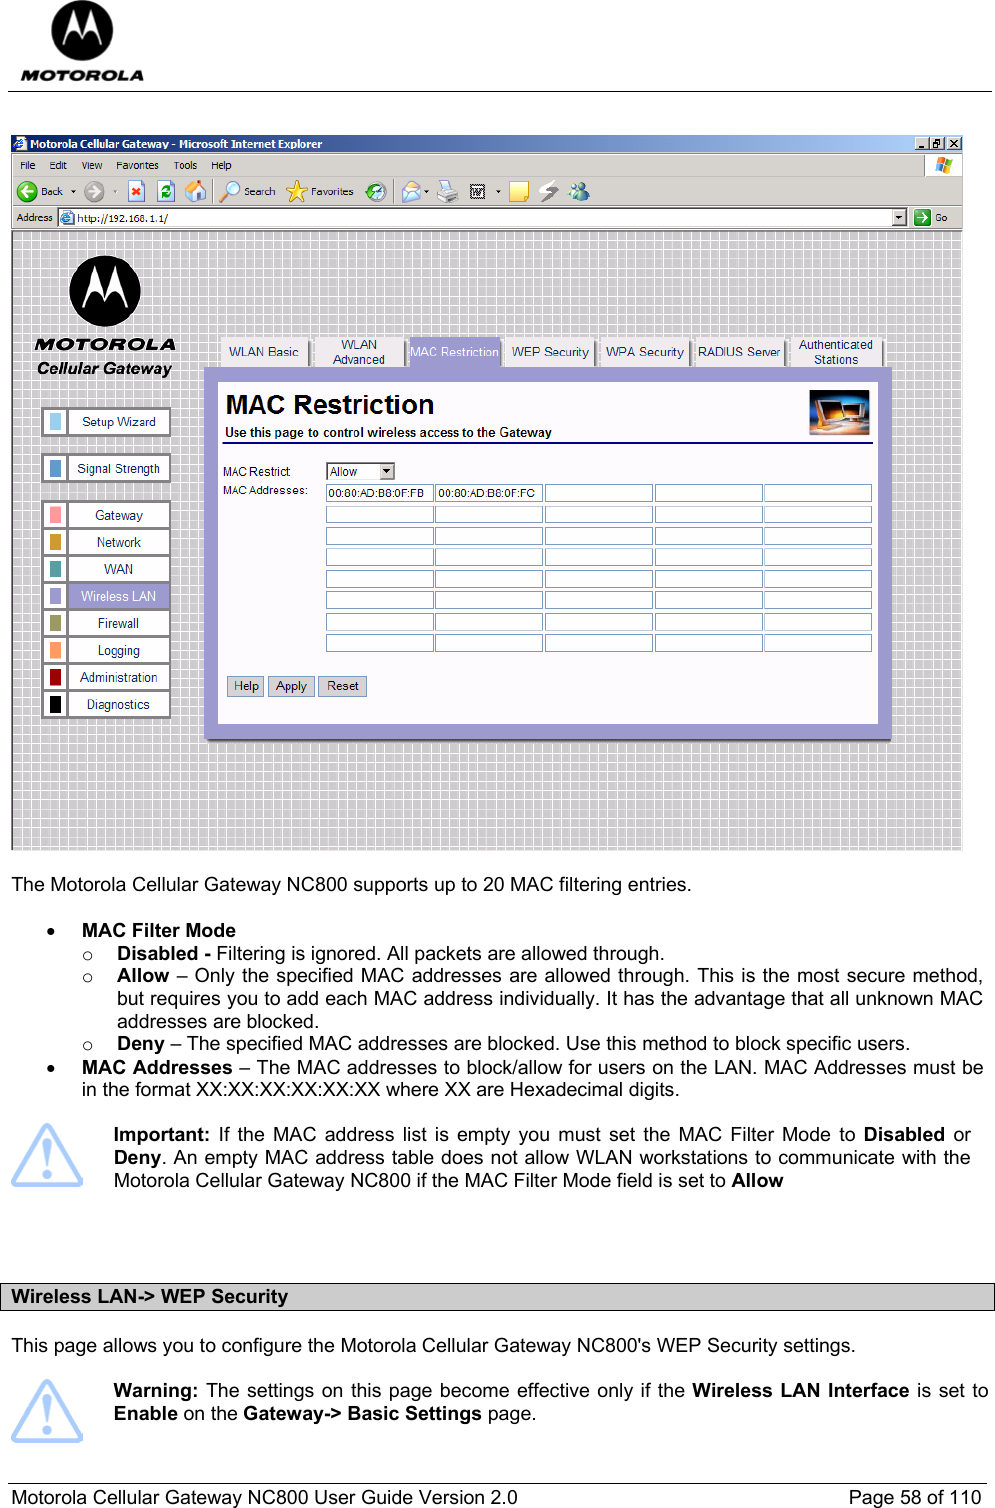  Motorola Cellular Gateway NC800 User Guide Version 2.0     Page 58 of 110     The Motorola Cellular Gateway NC800 supports up to 20 MAC filtering entries.  • MAC Filter Mode  o Disabled - Filtering is ignored. All packets are allowed through.  o Allow – Only the specified MAC addresses are allowed through. This is the most secure method, but requires you to add each MAC address individually. It has the advantage that all unknown MAC addresses are blocked.  o Deny – The specified MAC addresses are blocked. Use this method to block specific users.  • MAC Addresses – The MAC addresses to block/allow for users on the LAN. MAC Addresses must be in the format XX:XX:XX:XX:XX:XX where XX are Hexadecimal digits.    Important:  If the MAC address list is empty you must set the MAC Filter Mode to Disabled or Deny. An empty MAC address table does not allow WLAN workstations to communicate with the Motorola Cellular Gateway NC800 if the MAC Filter Mode field is set to Allow    Wireless LAN-&gt; WEP Security This page allows you to configure the Motorola Cellular Gateway NC800&apos;s WEP Security settings.    Warning: The settings on this page become effective only if the Wireless LAN Interface is set to Enable on the Gateway-&gt; Basic Settings page.  